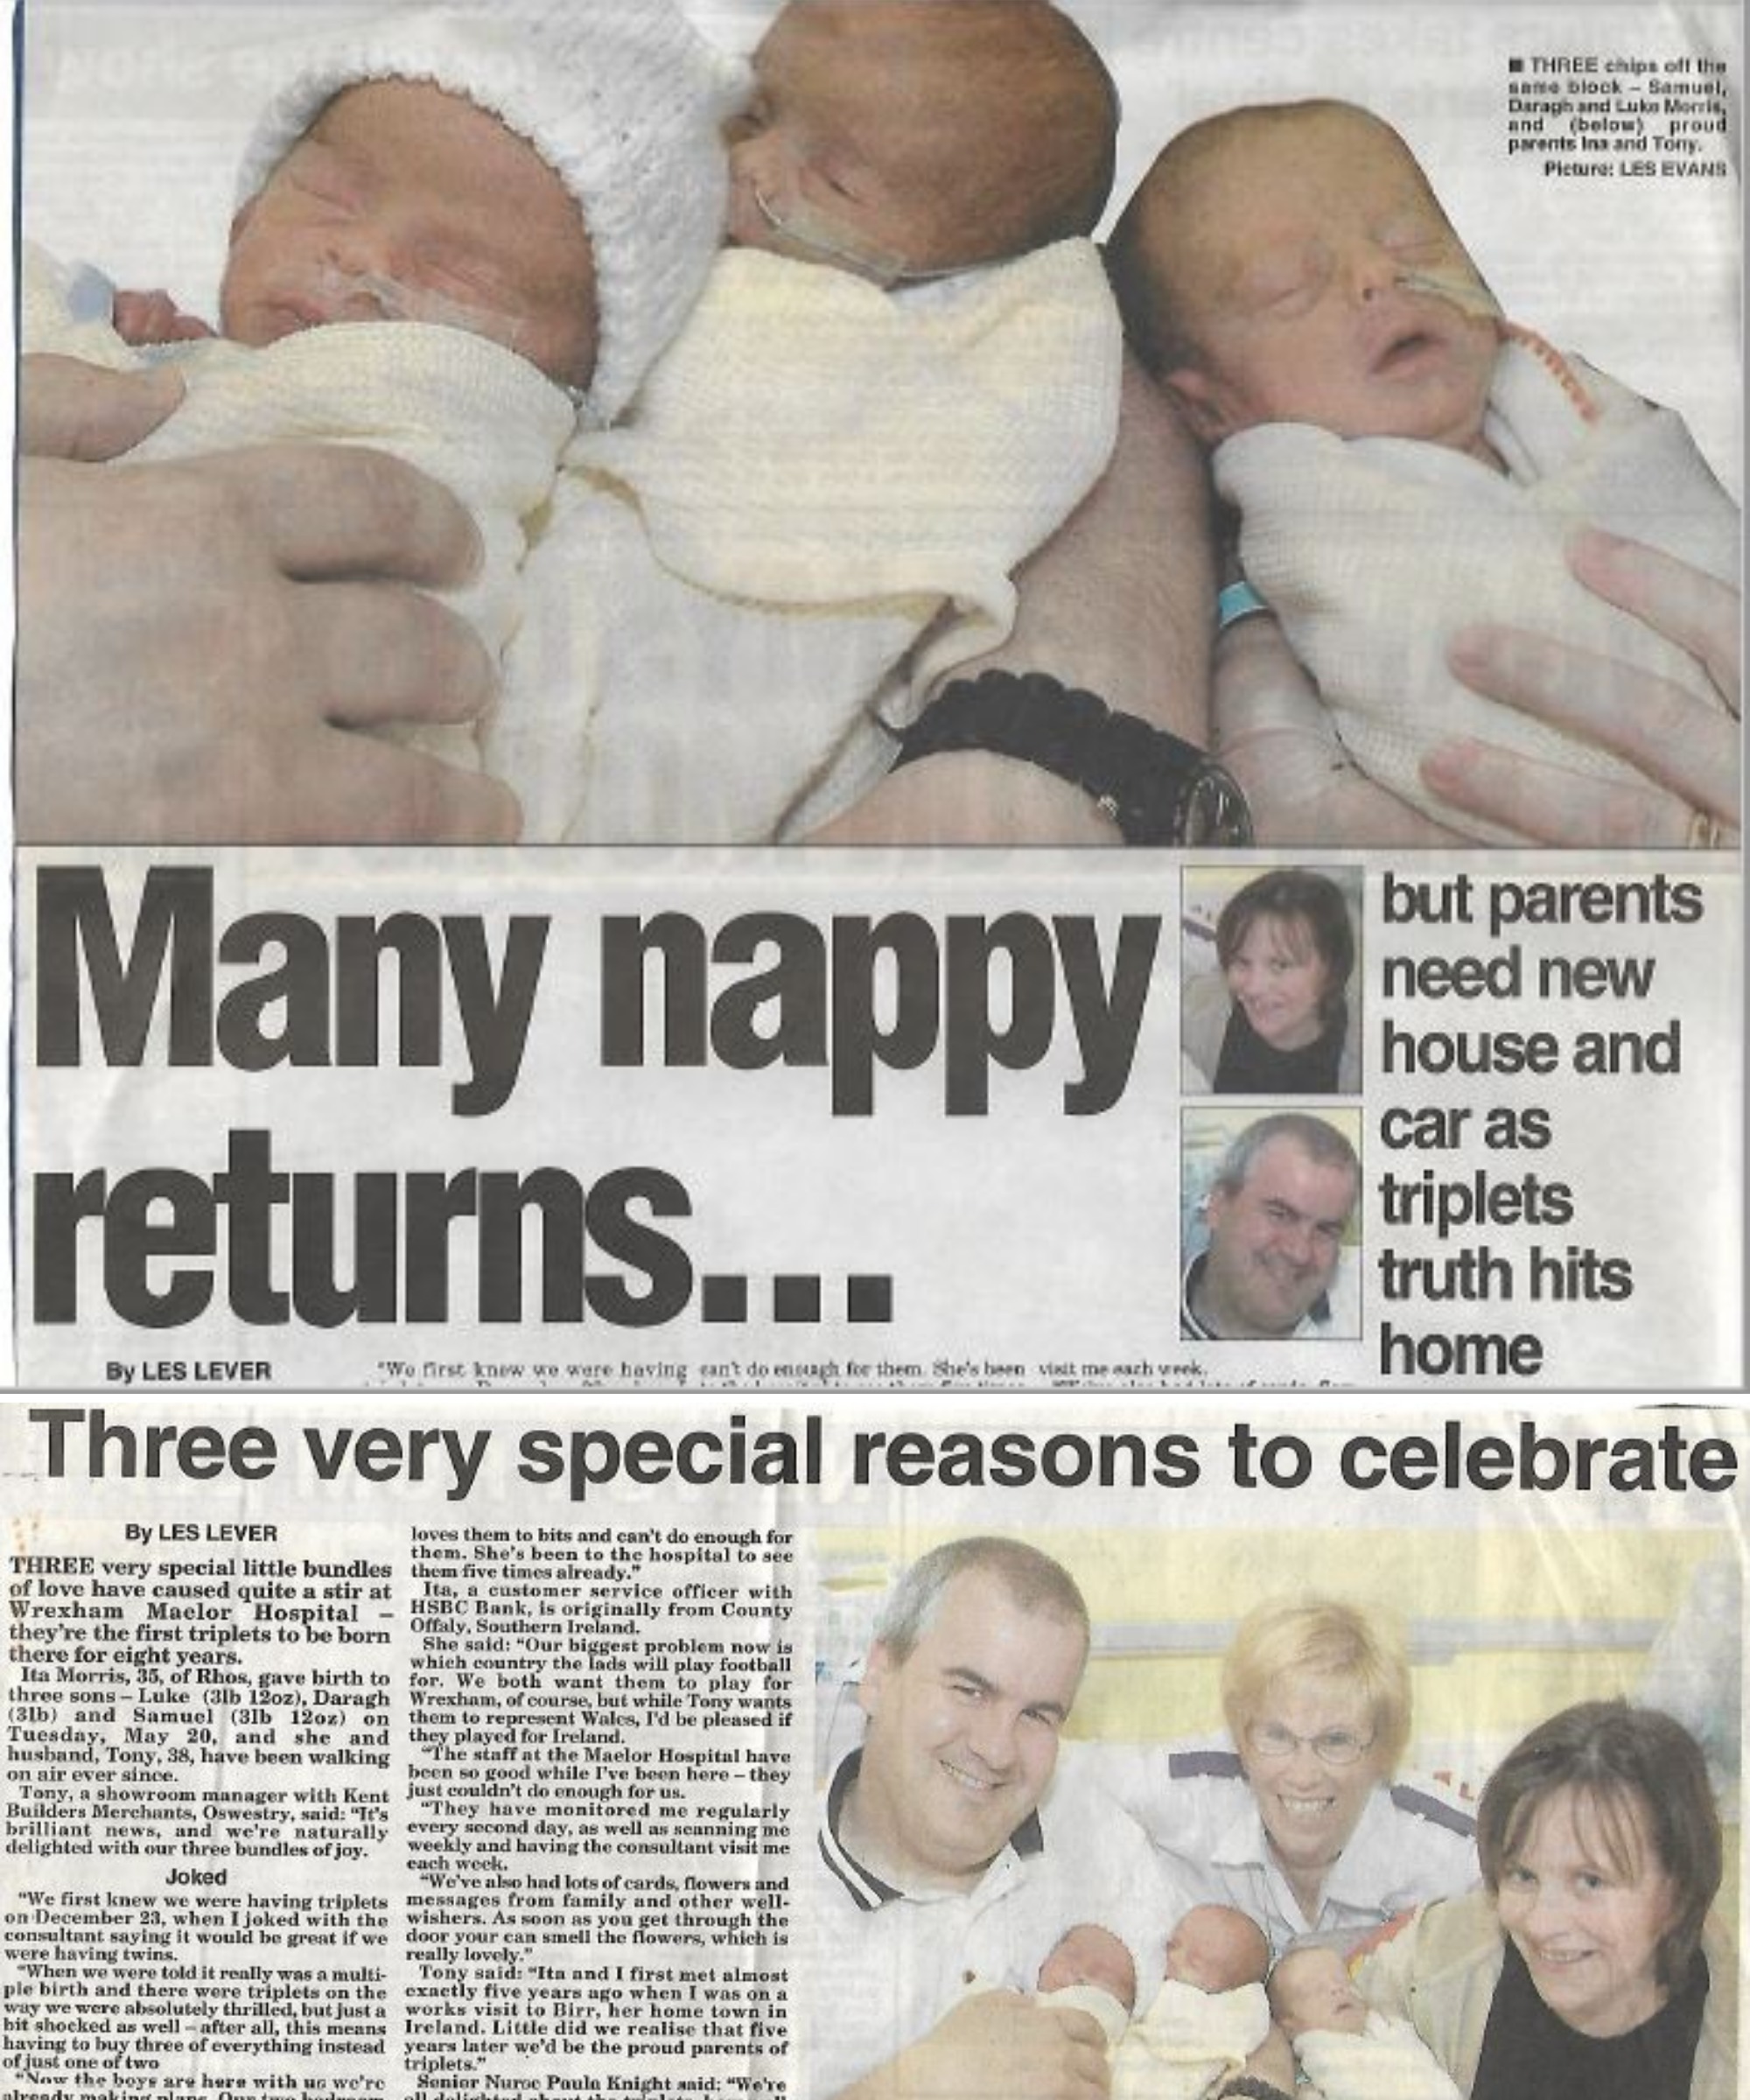 How the Leader reported the birth of triplets Daragh, Sam and Luke Morris at the Maelor.